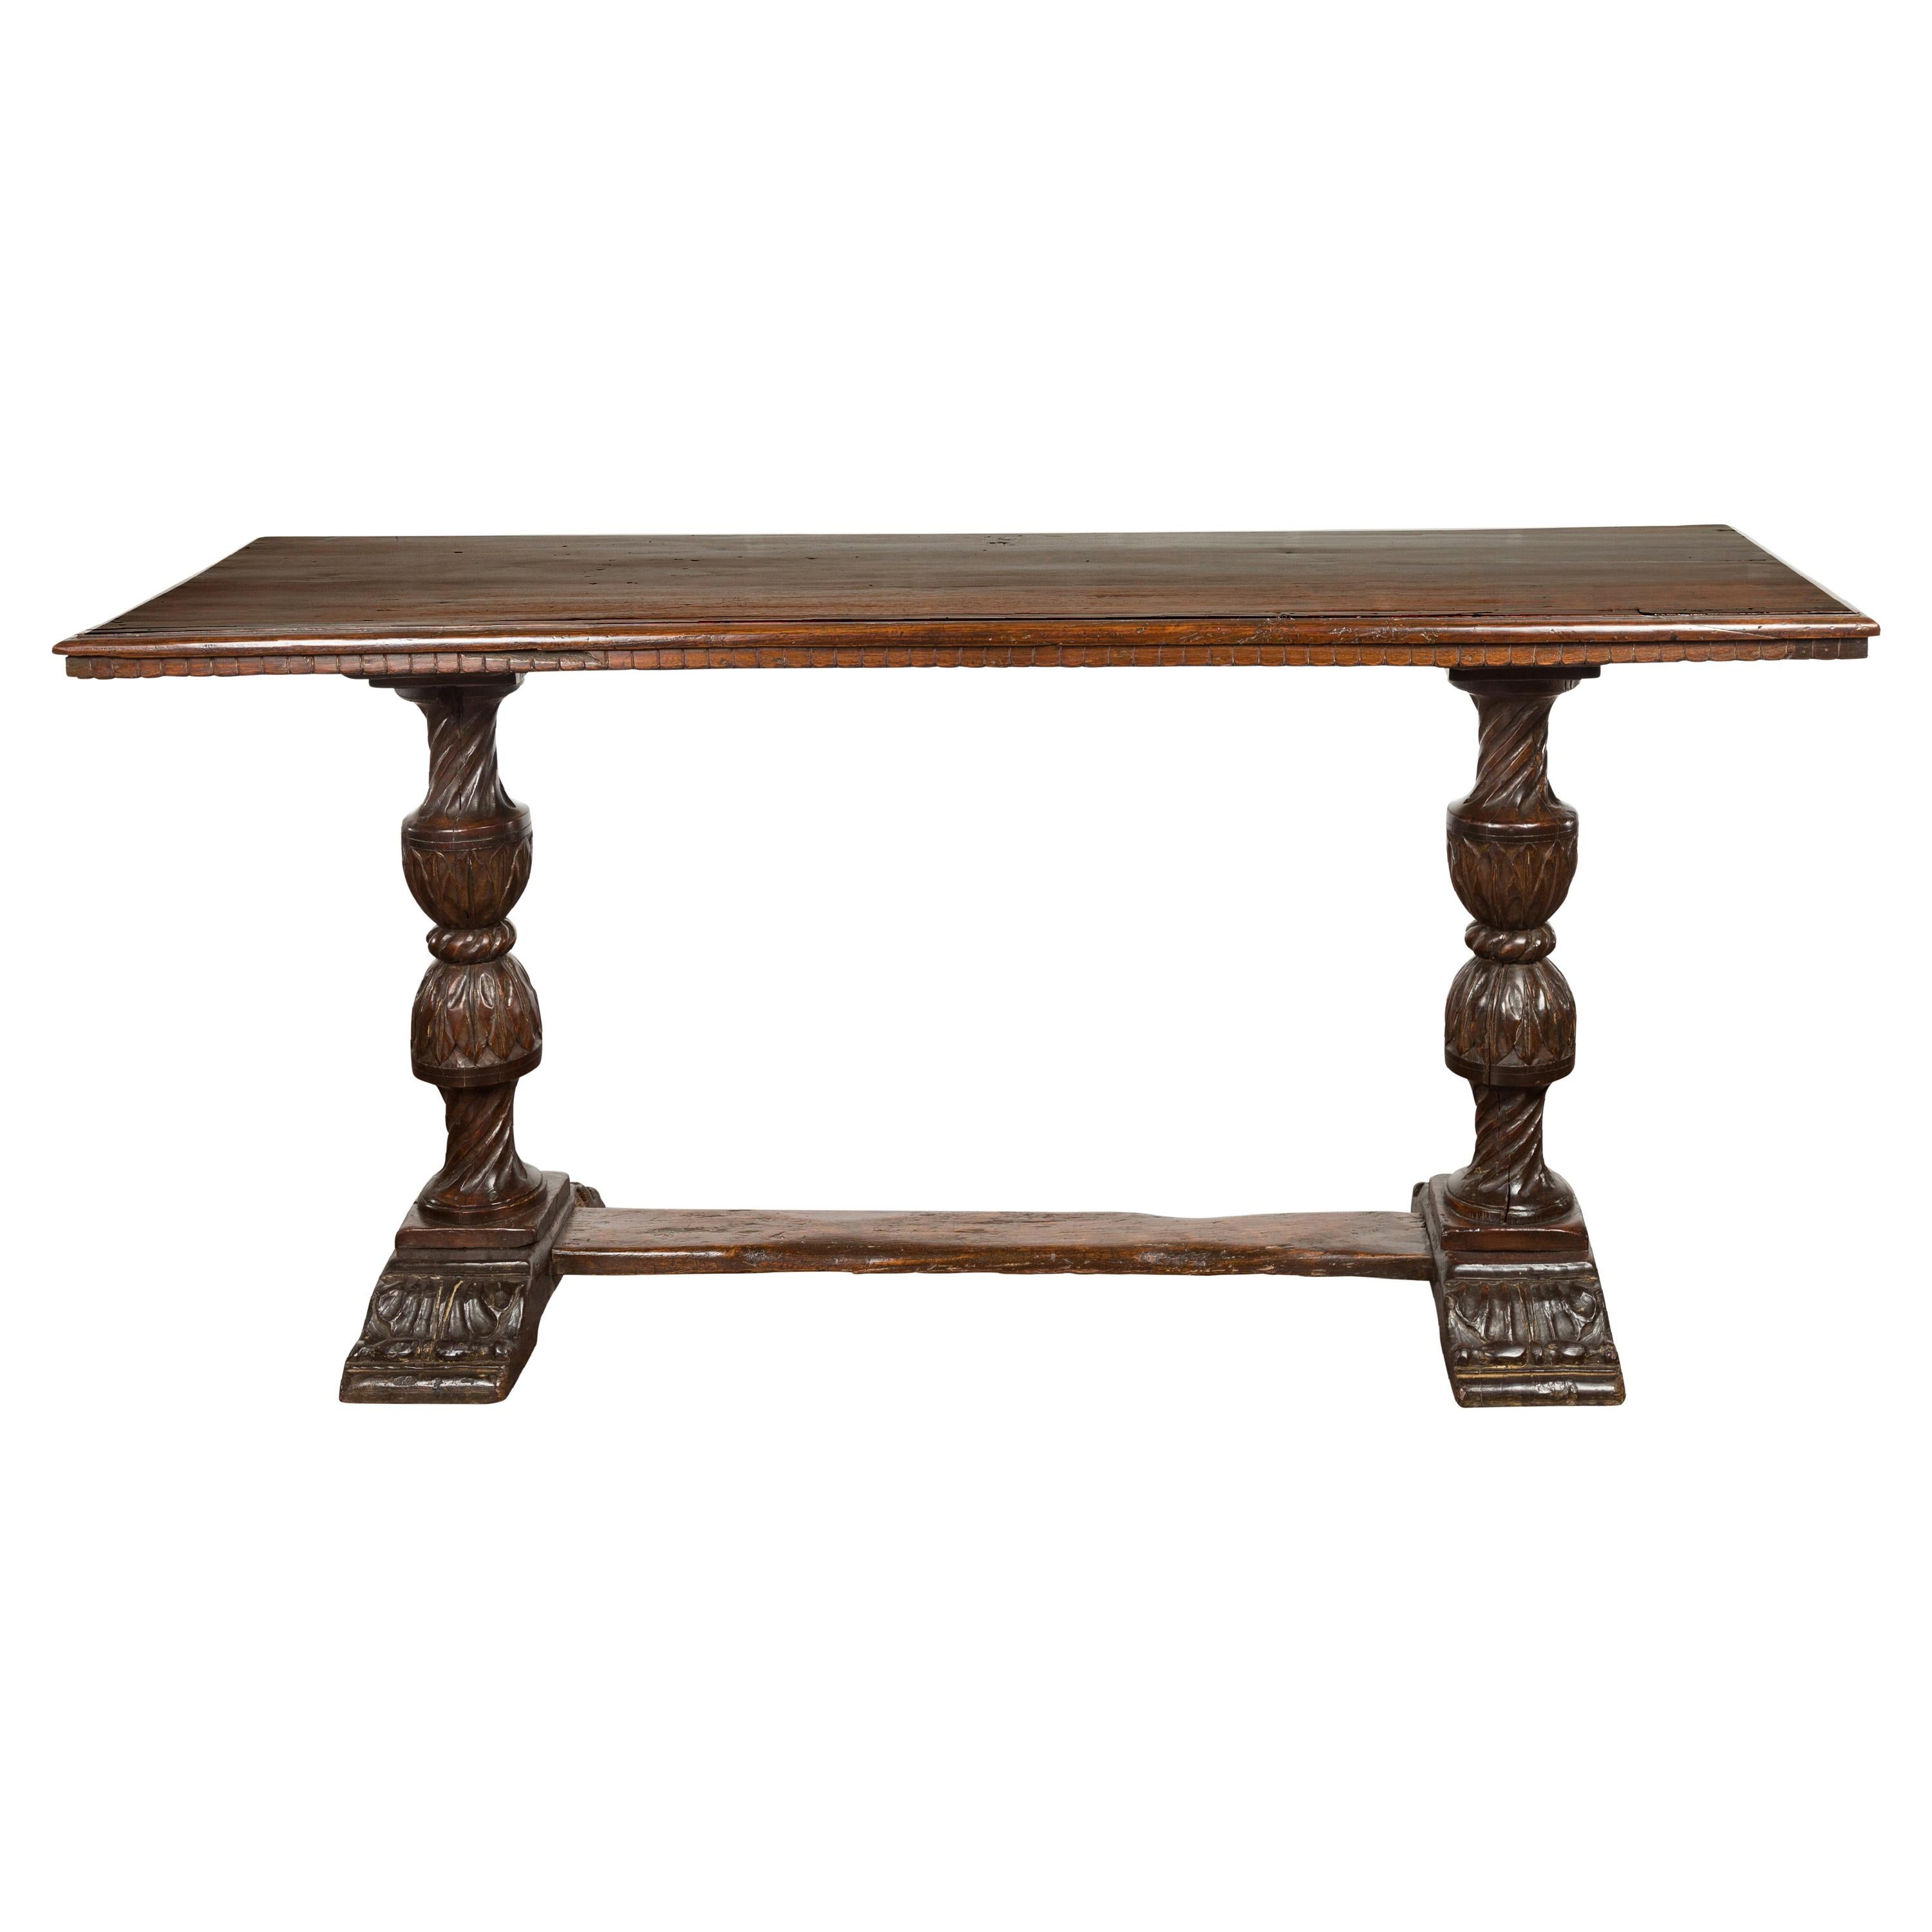 Italian 1820s Walnut Table with Carved Legs, Twisted Motifs and Waterleaves For Sale